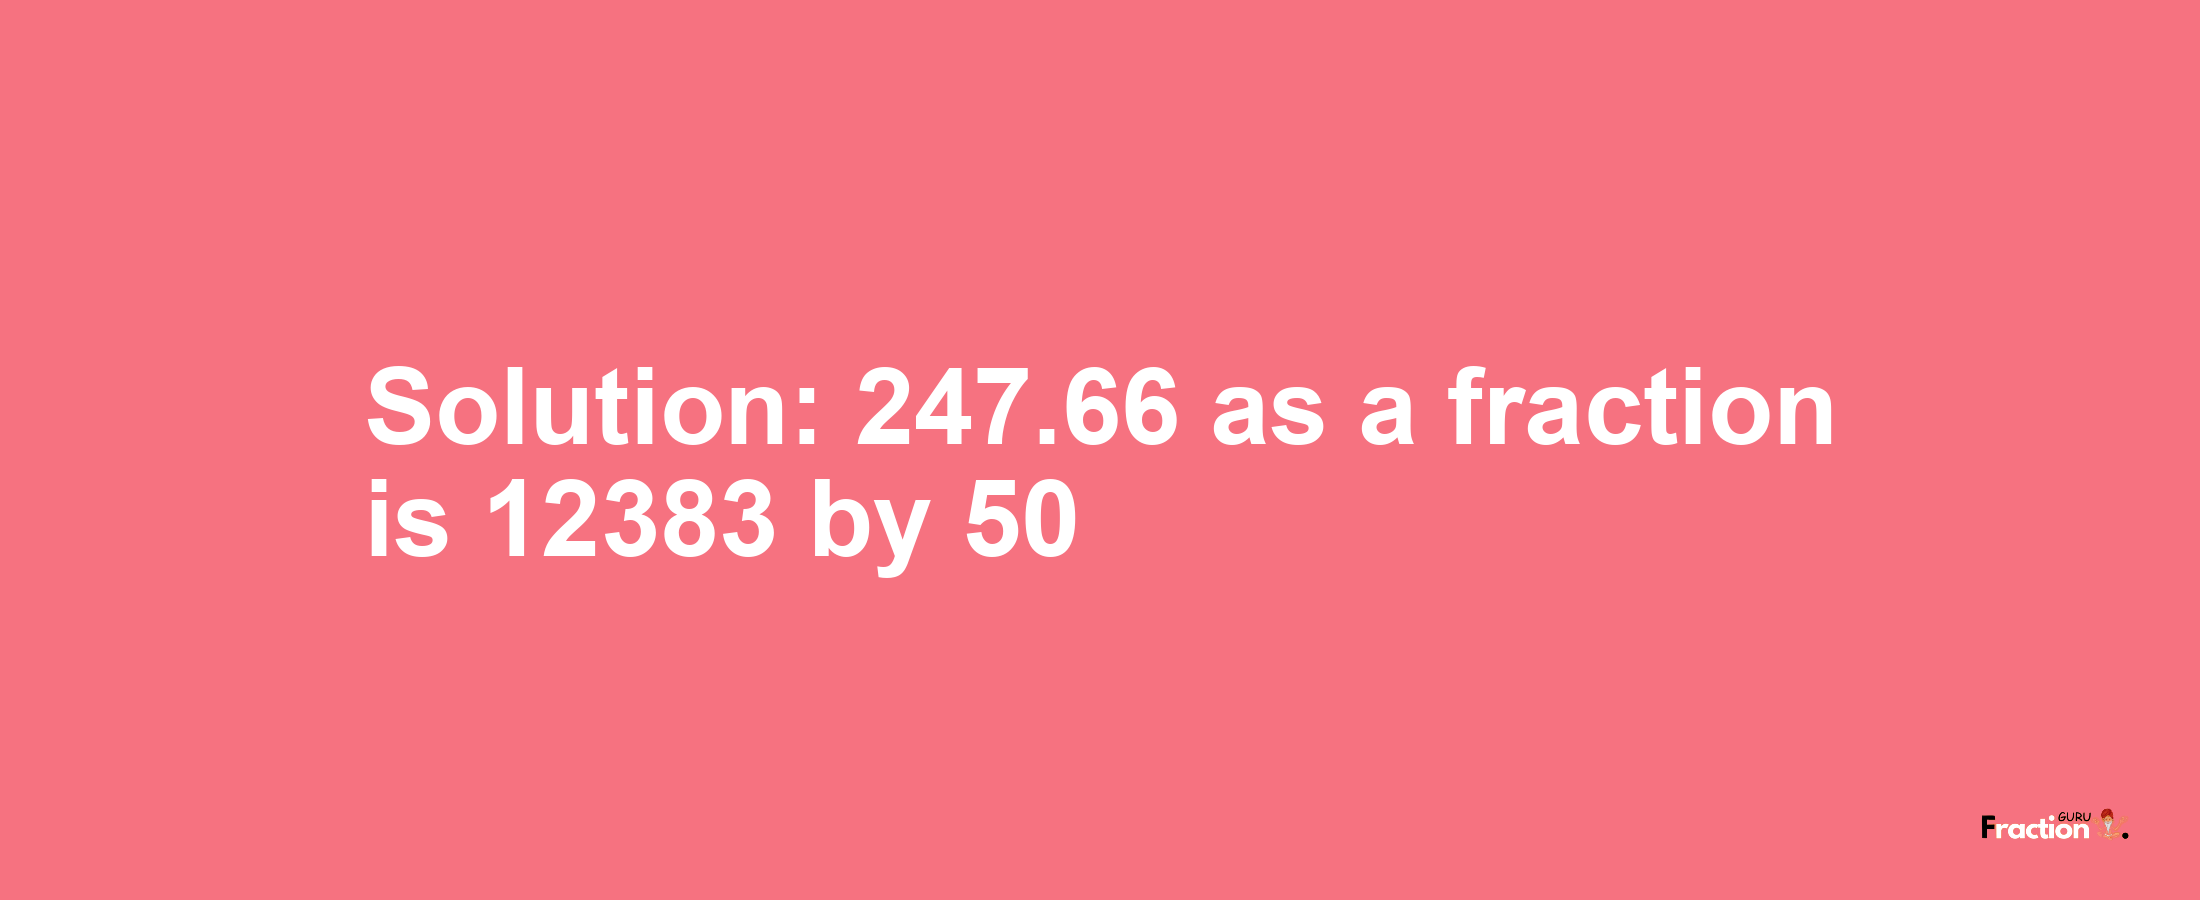 Solution:247.66 as a fraction is 12383/50